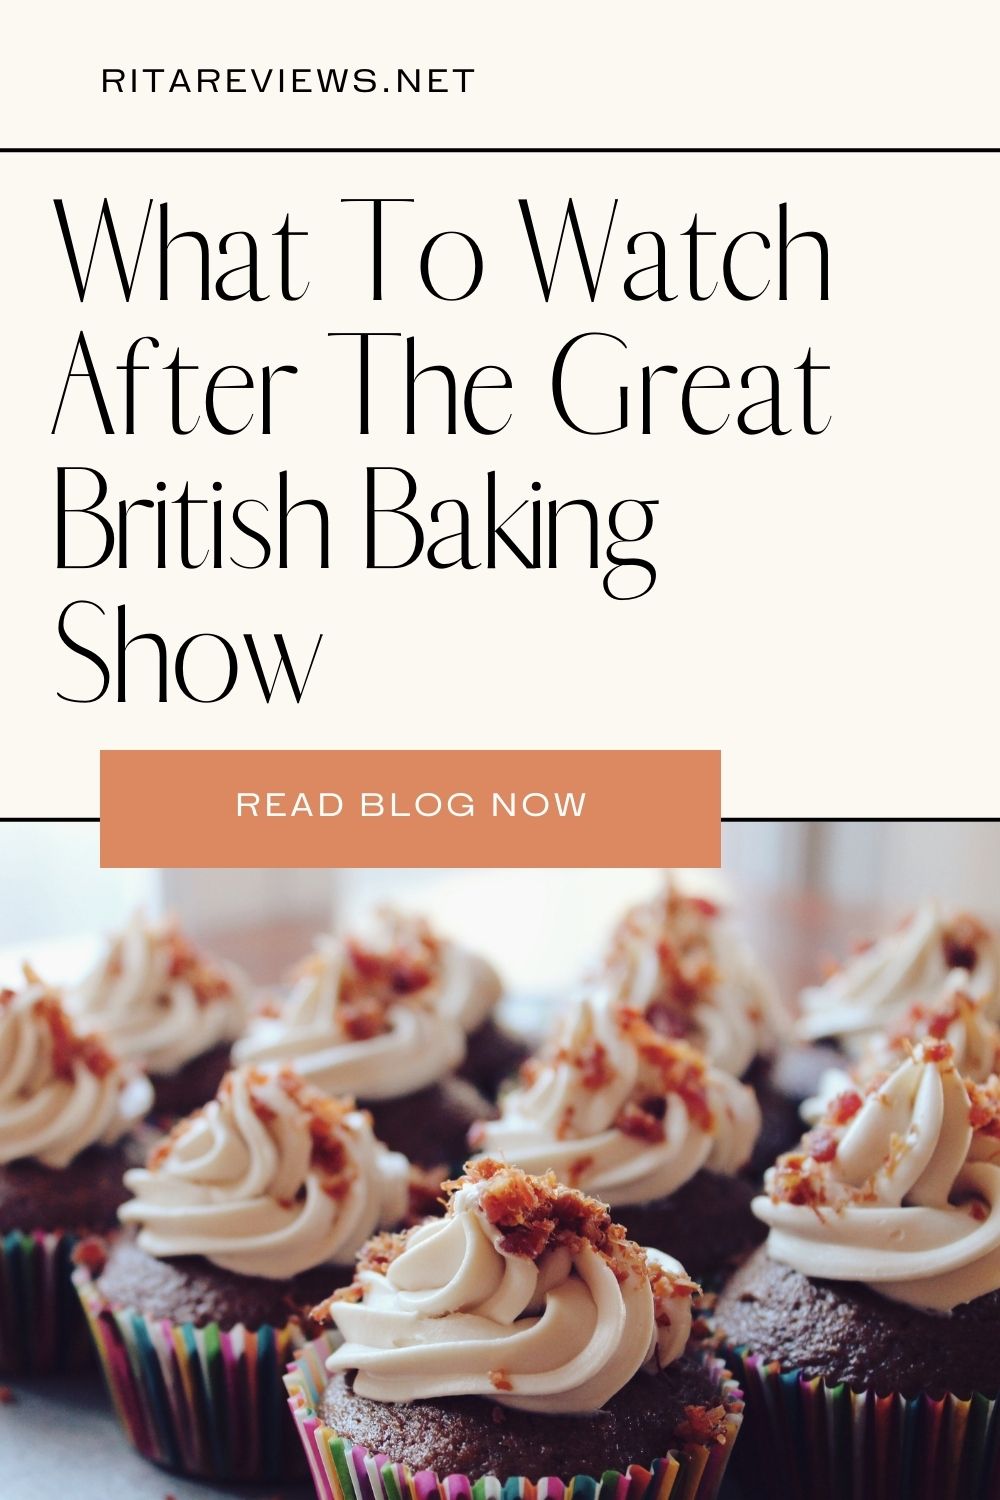 What To Watch After The Great British Baking Show